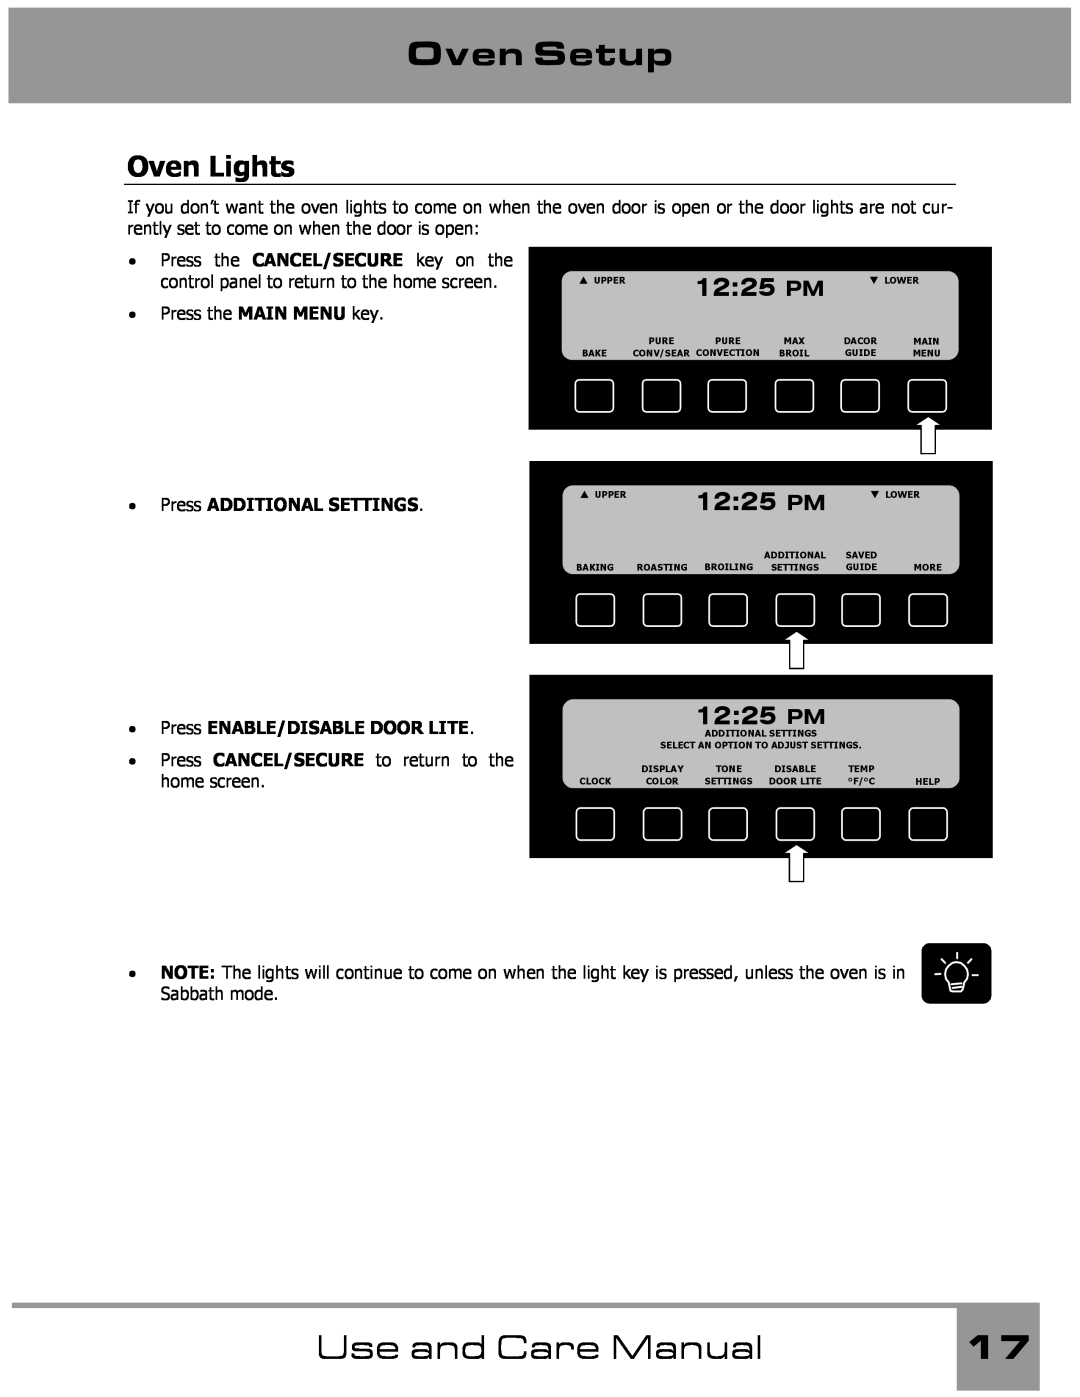 Dacor Wall Oven manual Oven Lights, Oven Setup, Use and Care Manual, 1225 PM, Press ADDITIONAL SETTINGS 